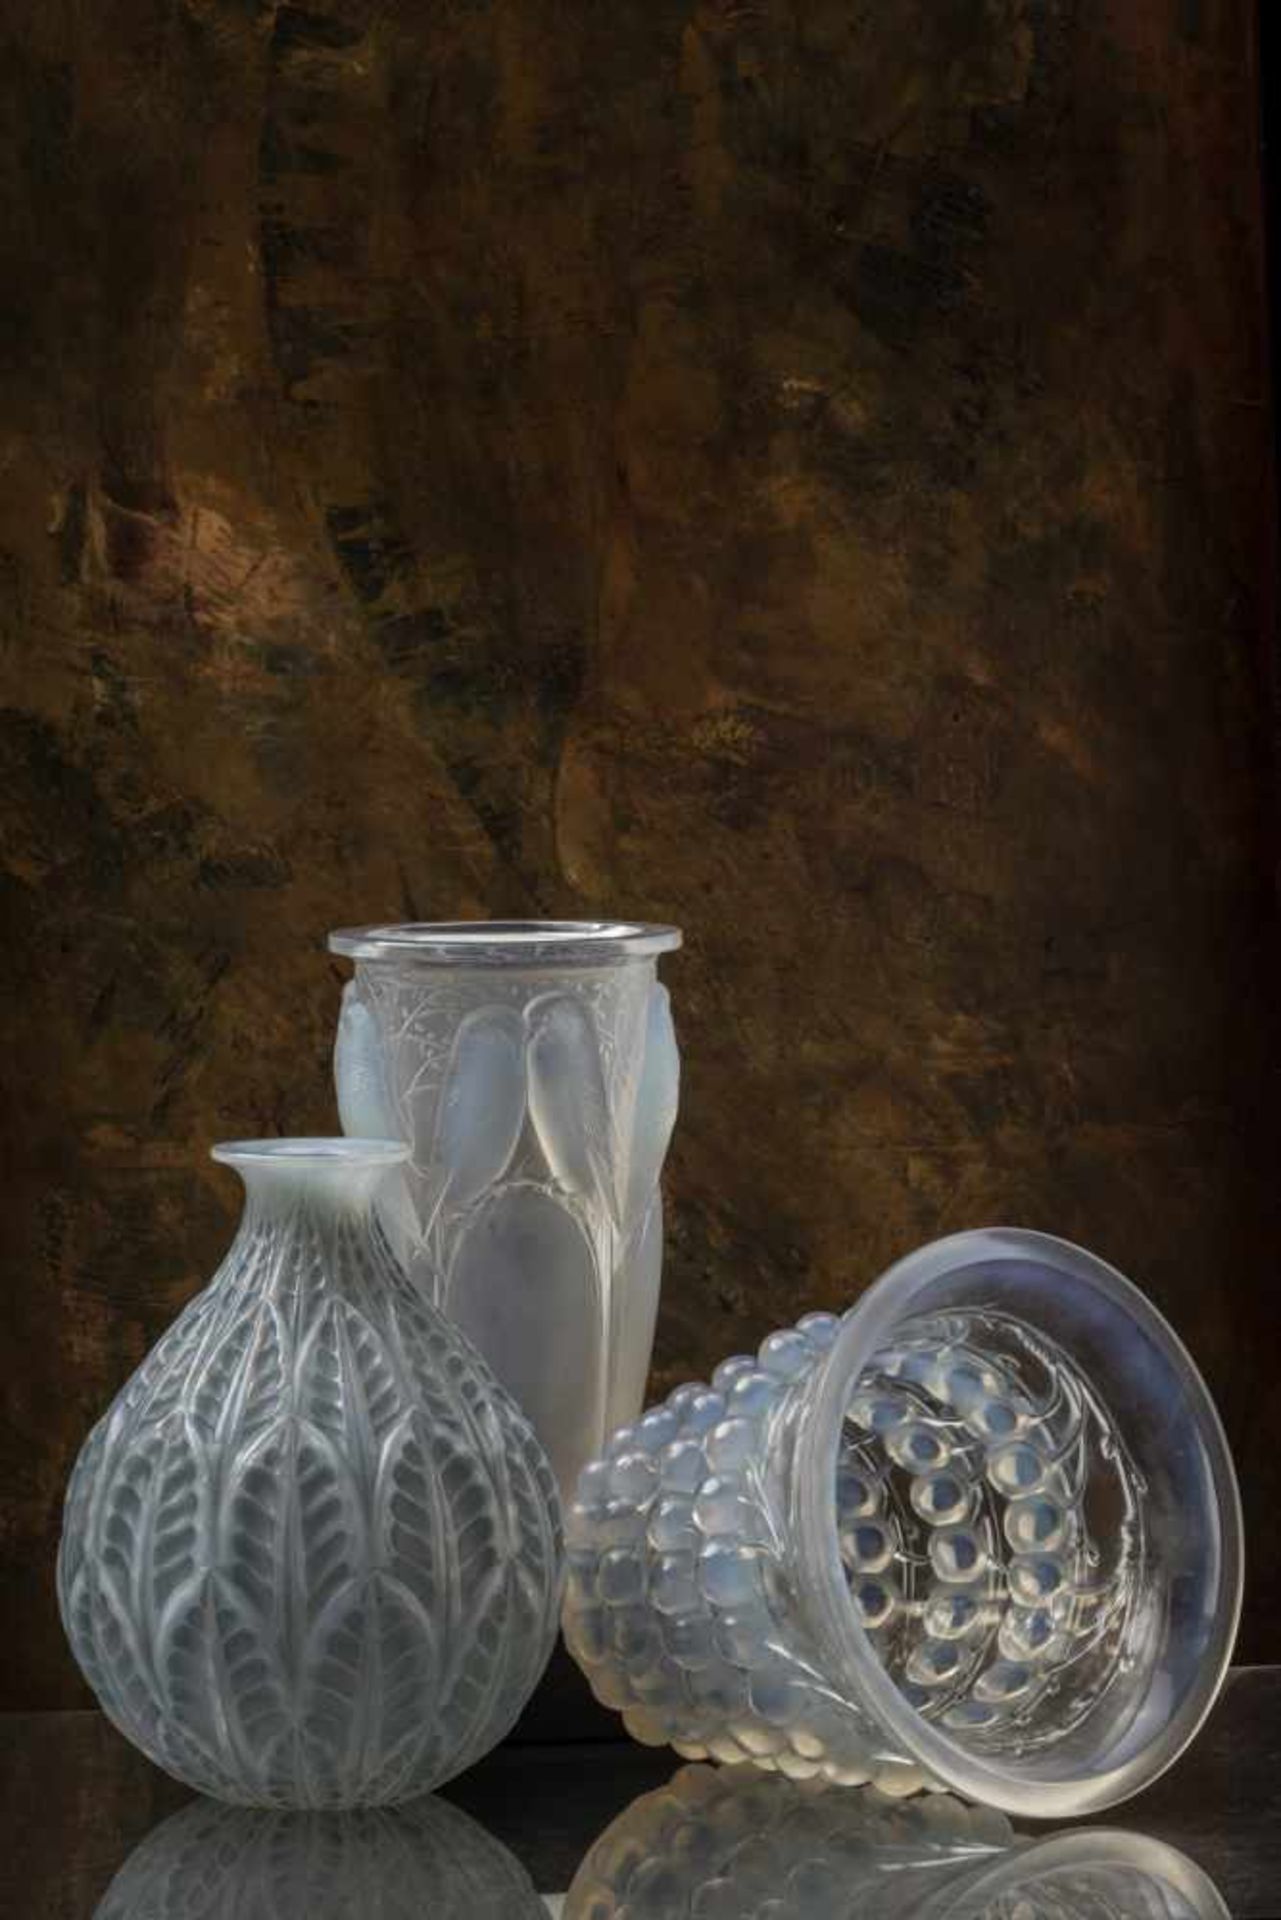 René Lalique, 'Ceylan' vase, 1924'Ceylan' vase, 1924H. 24.3 cm. Clear, moulded glass, satined and - Image 8 of 10